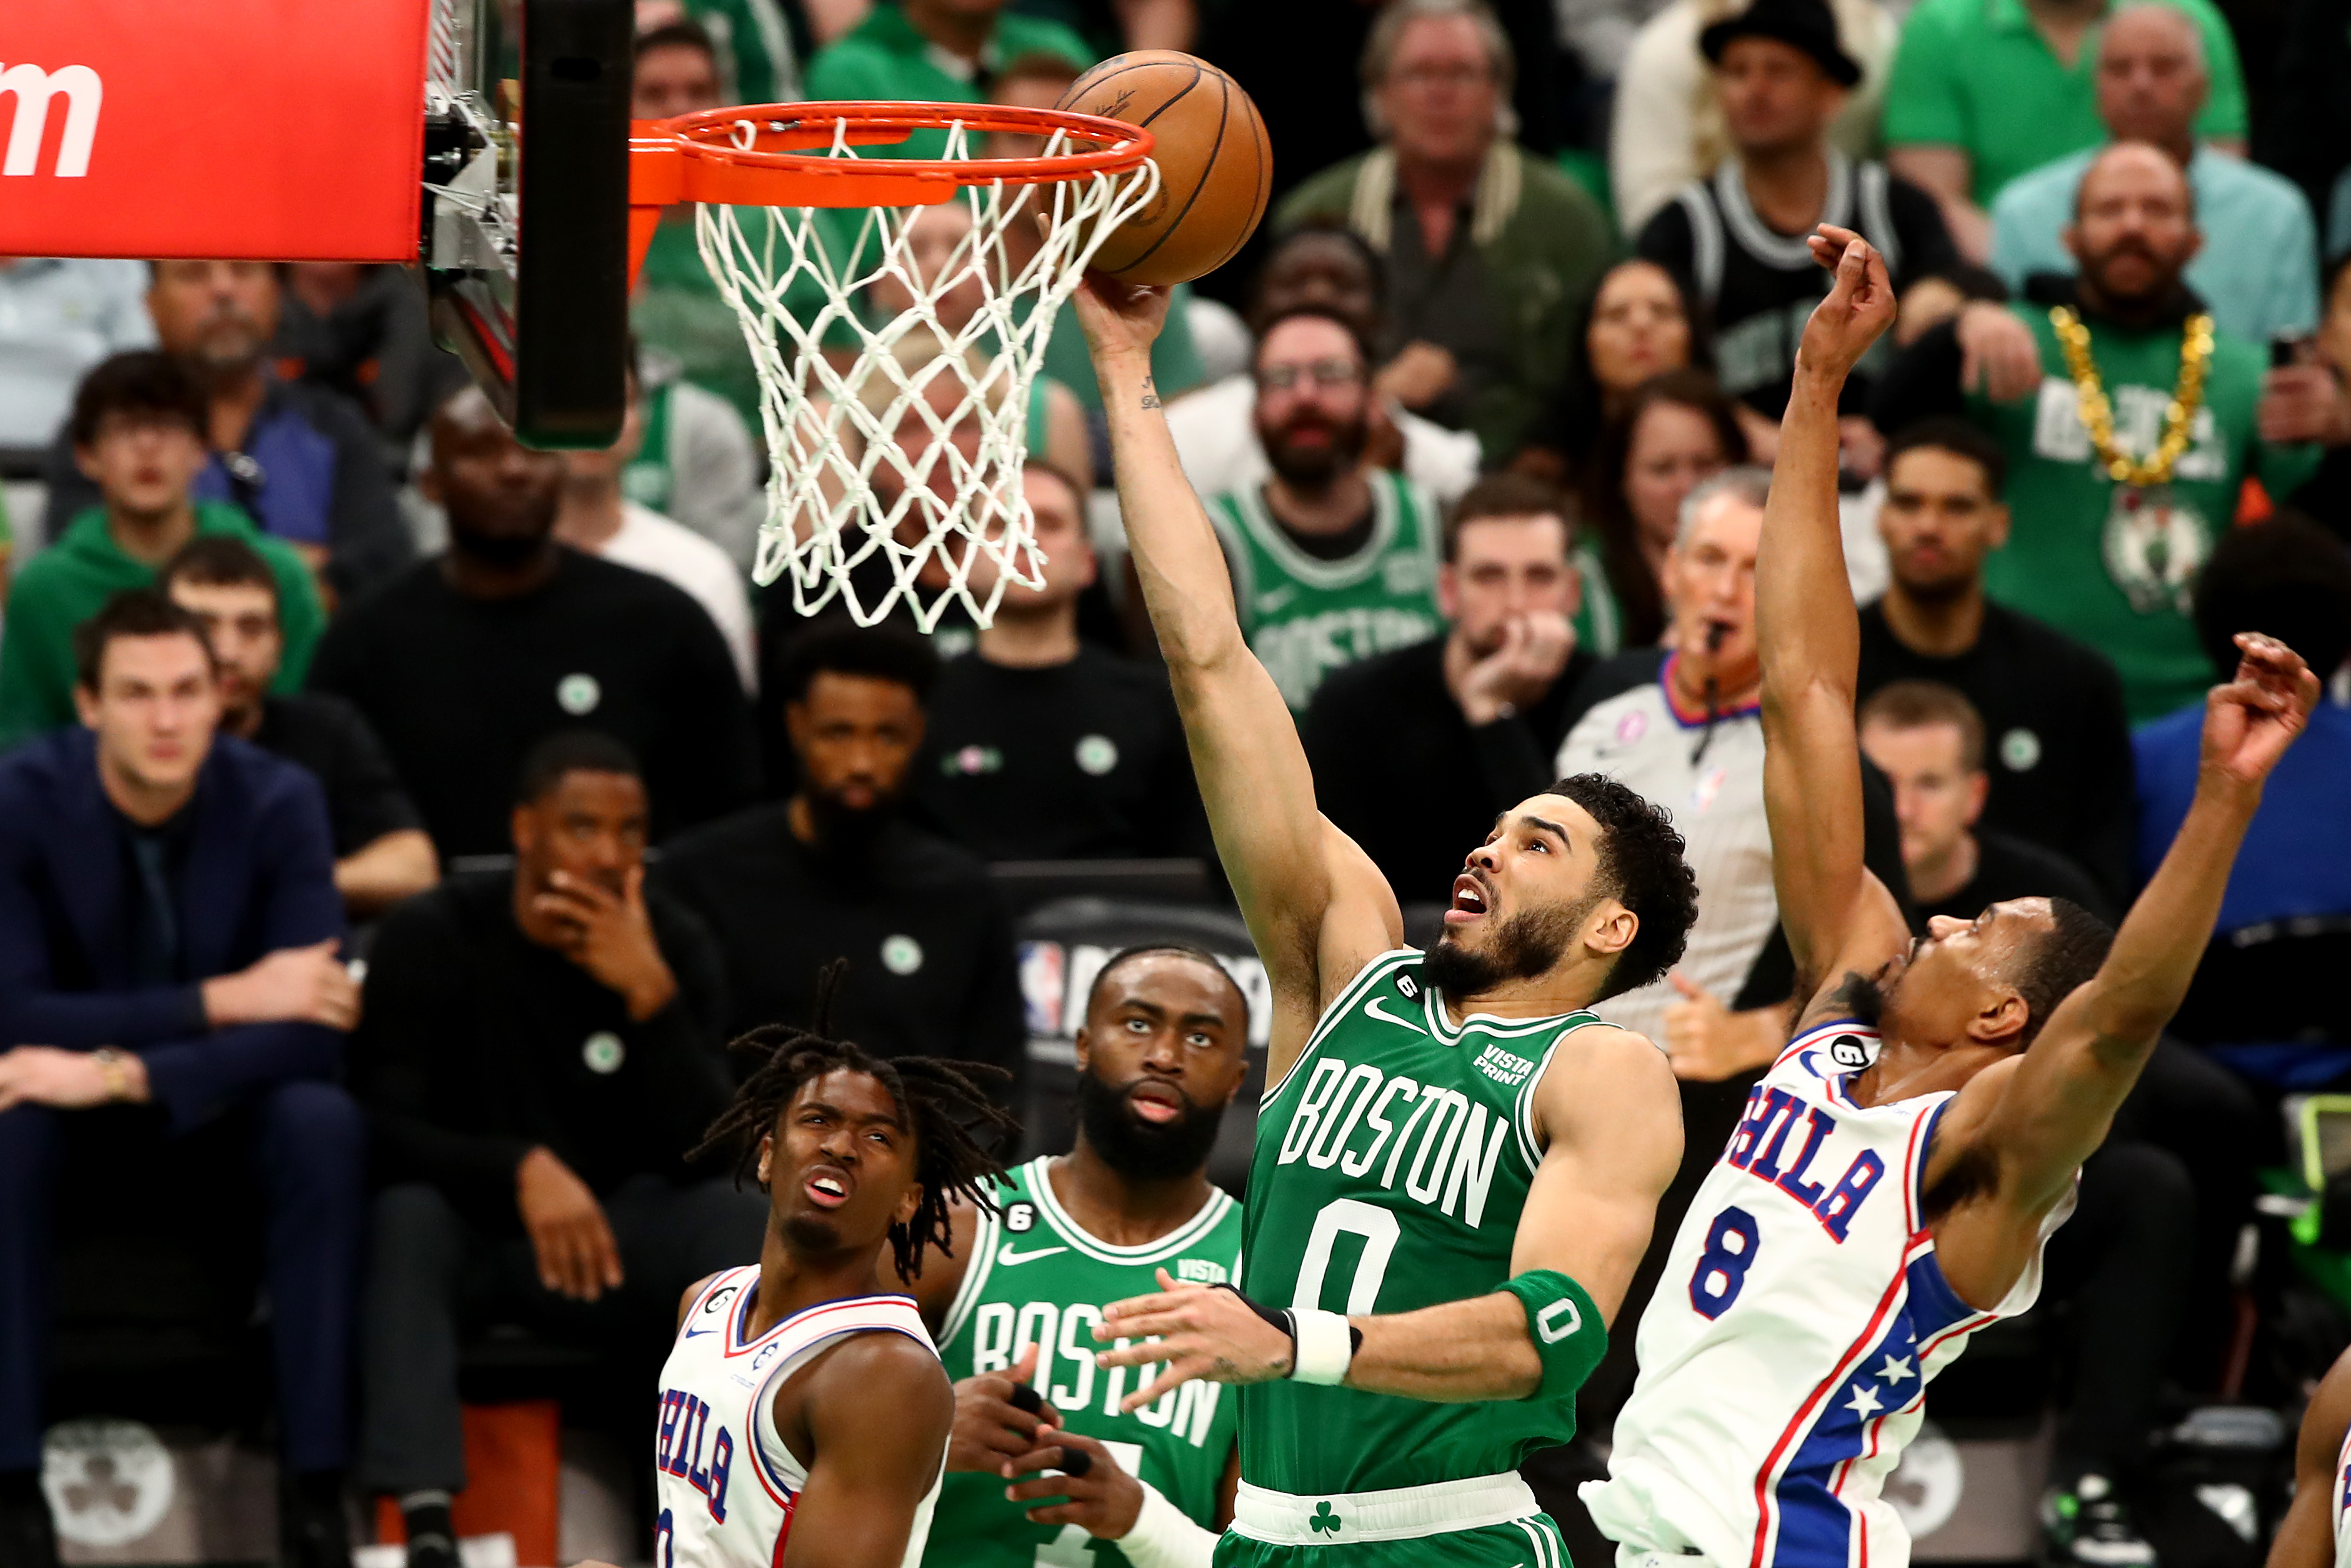 In disappointing loss to Lakers, only Jayson Tatum and Robert Williams  showed up ready for the challenge - The Boston Globe